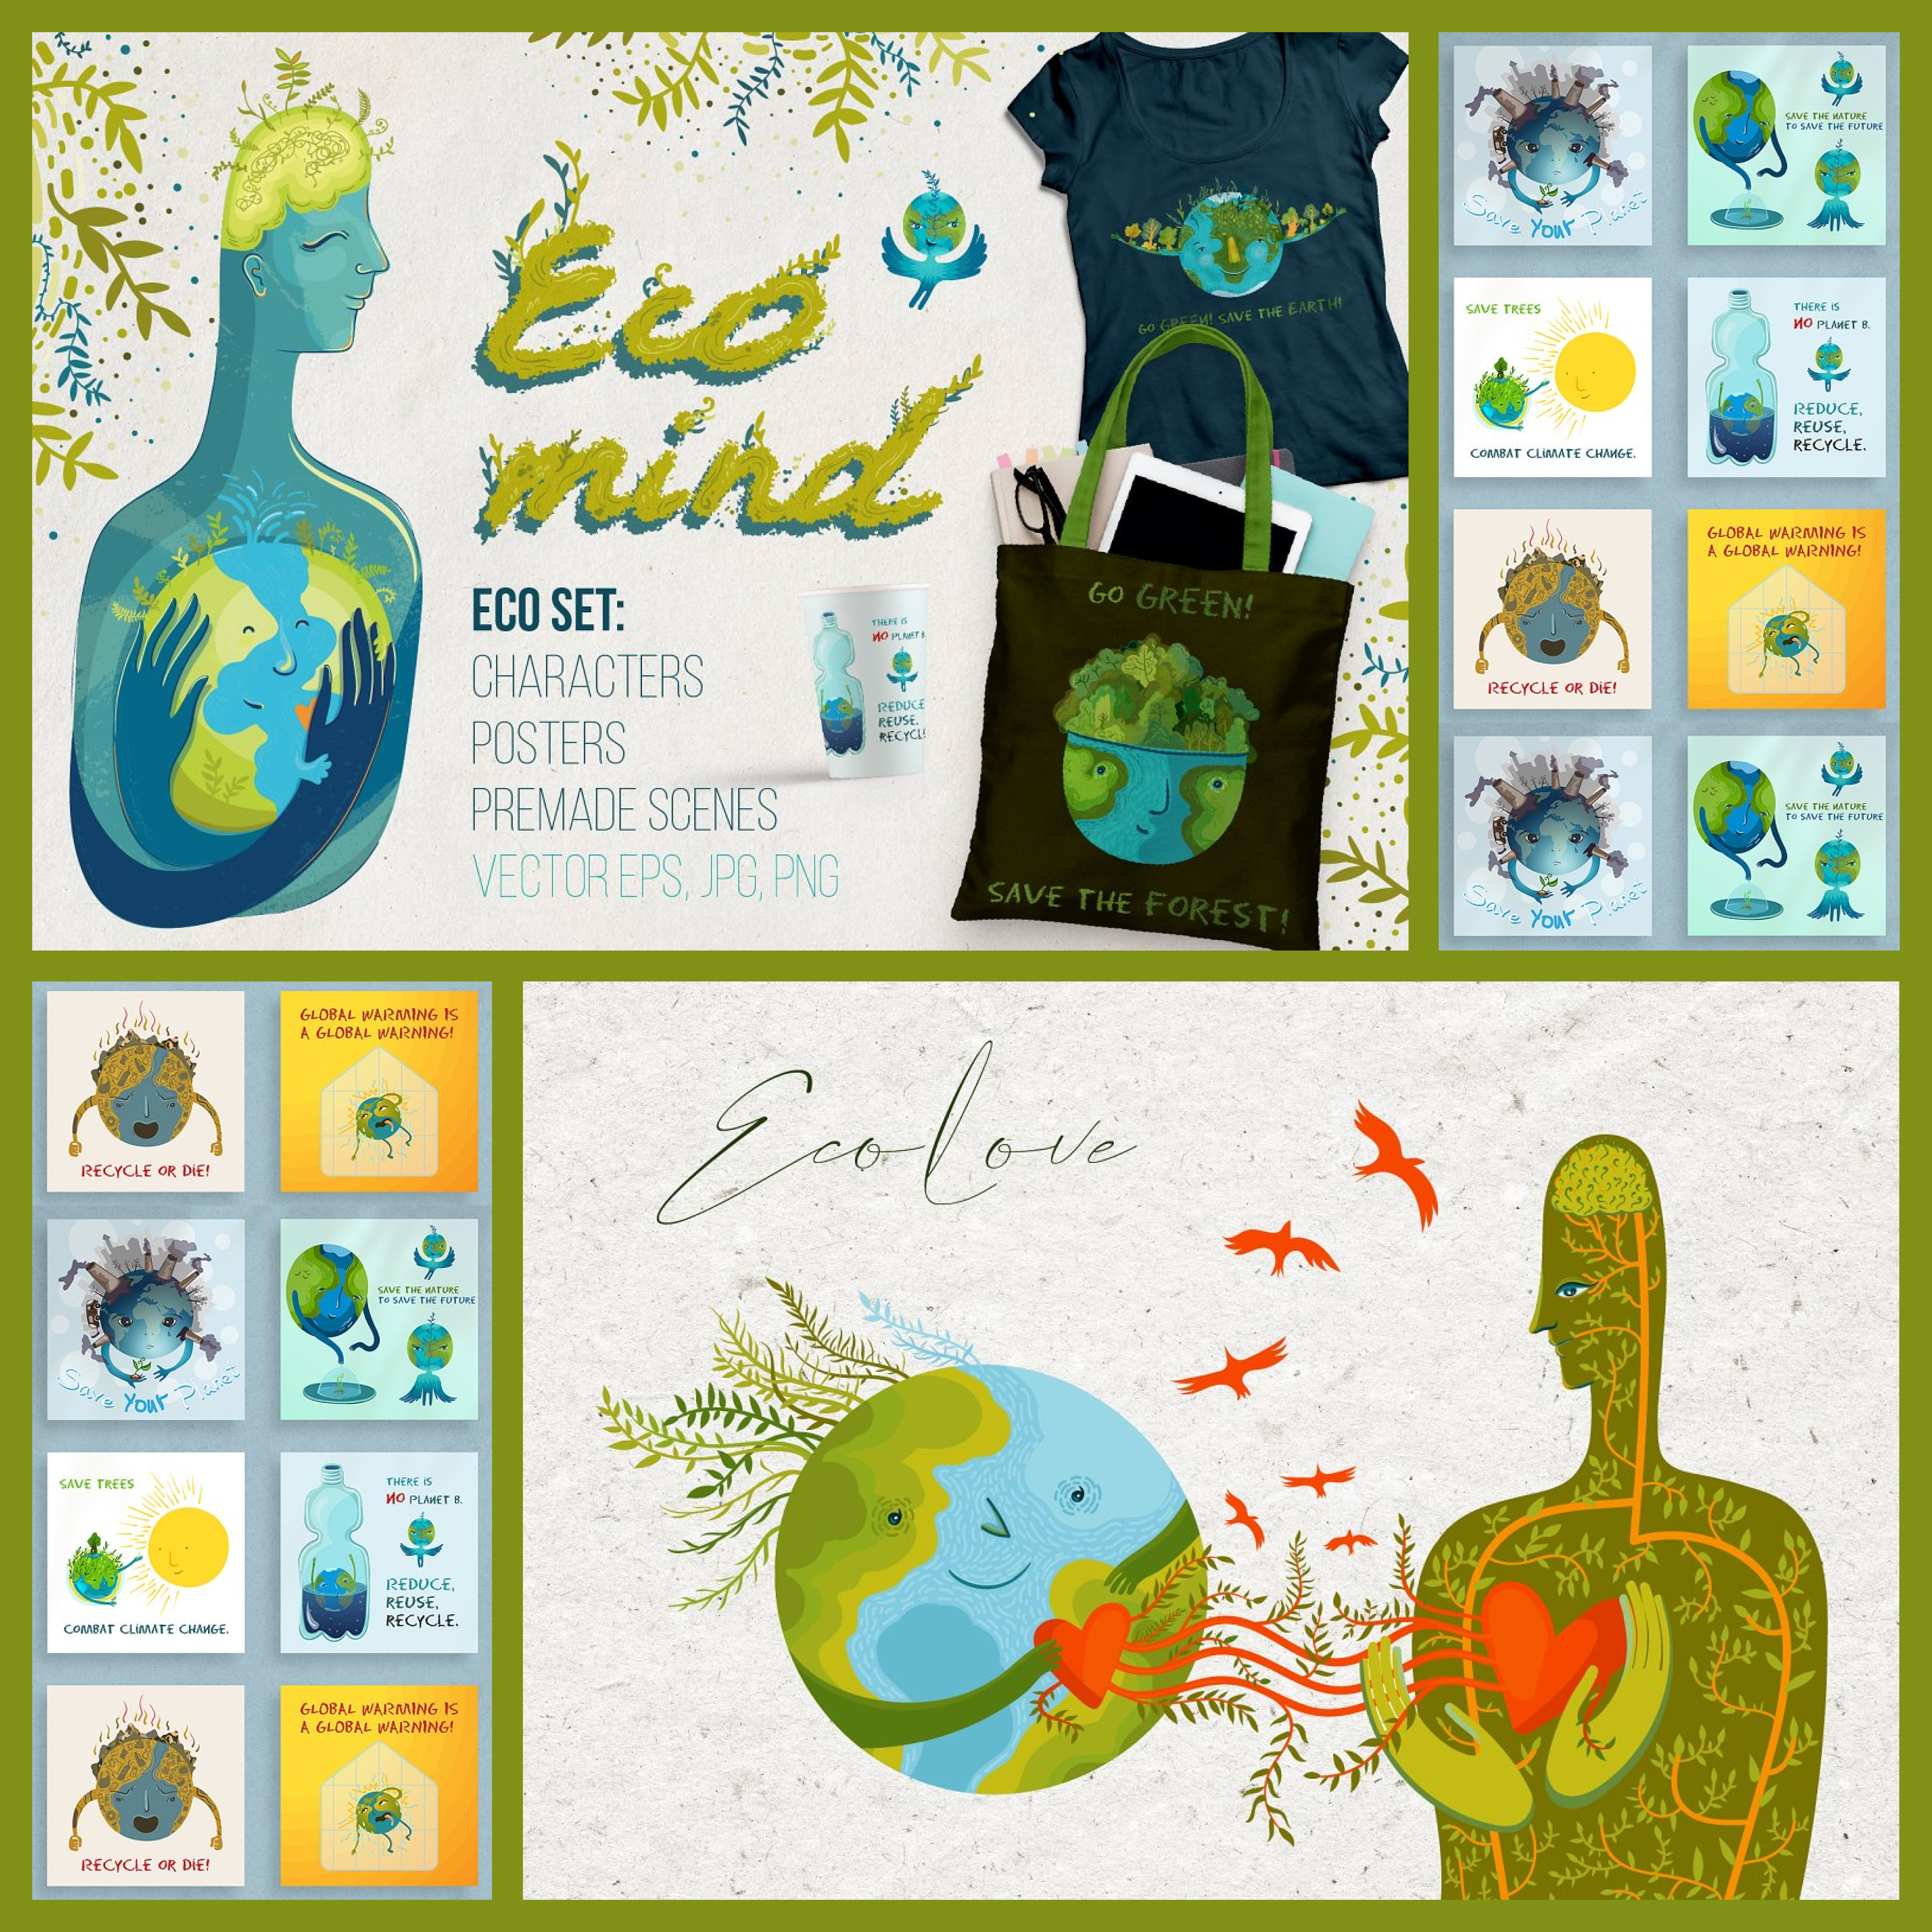 Preview in eco love with earth. vector set.